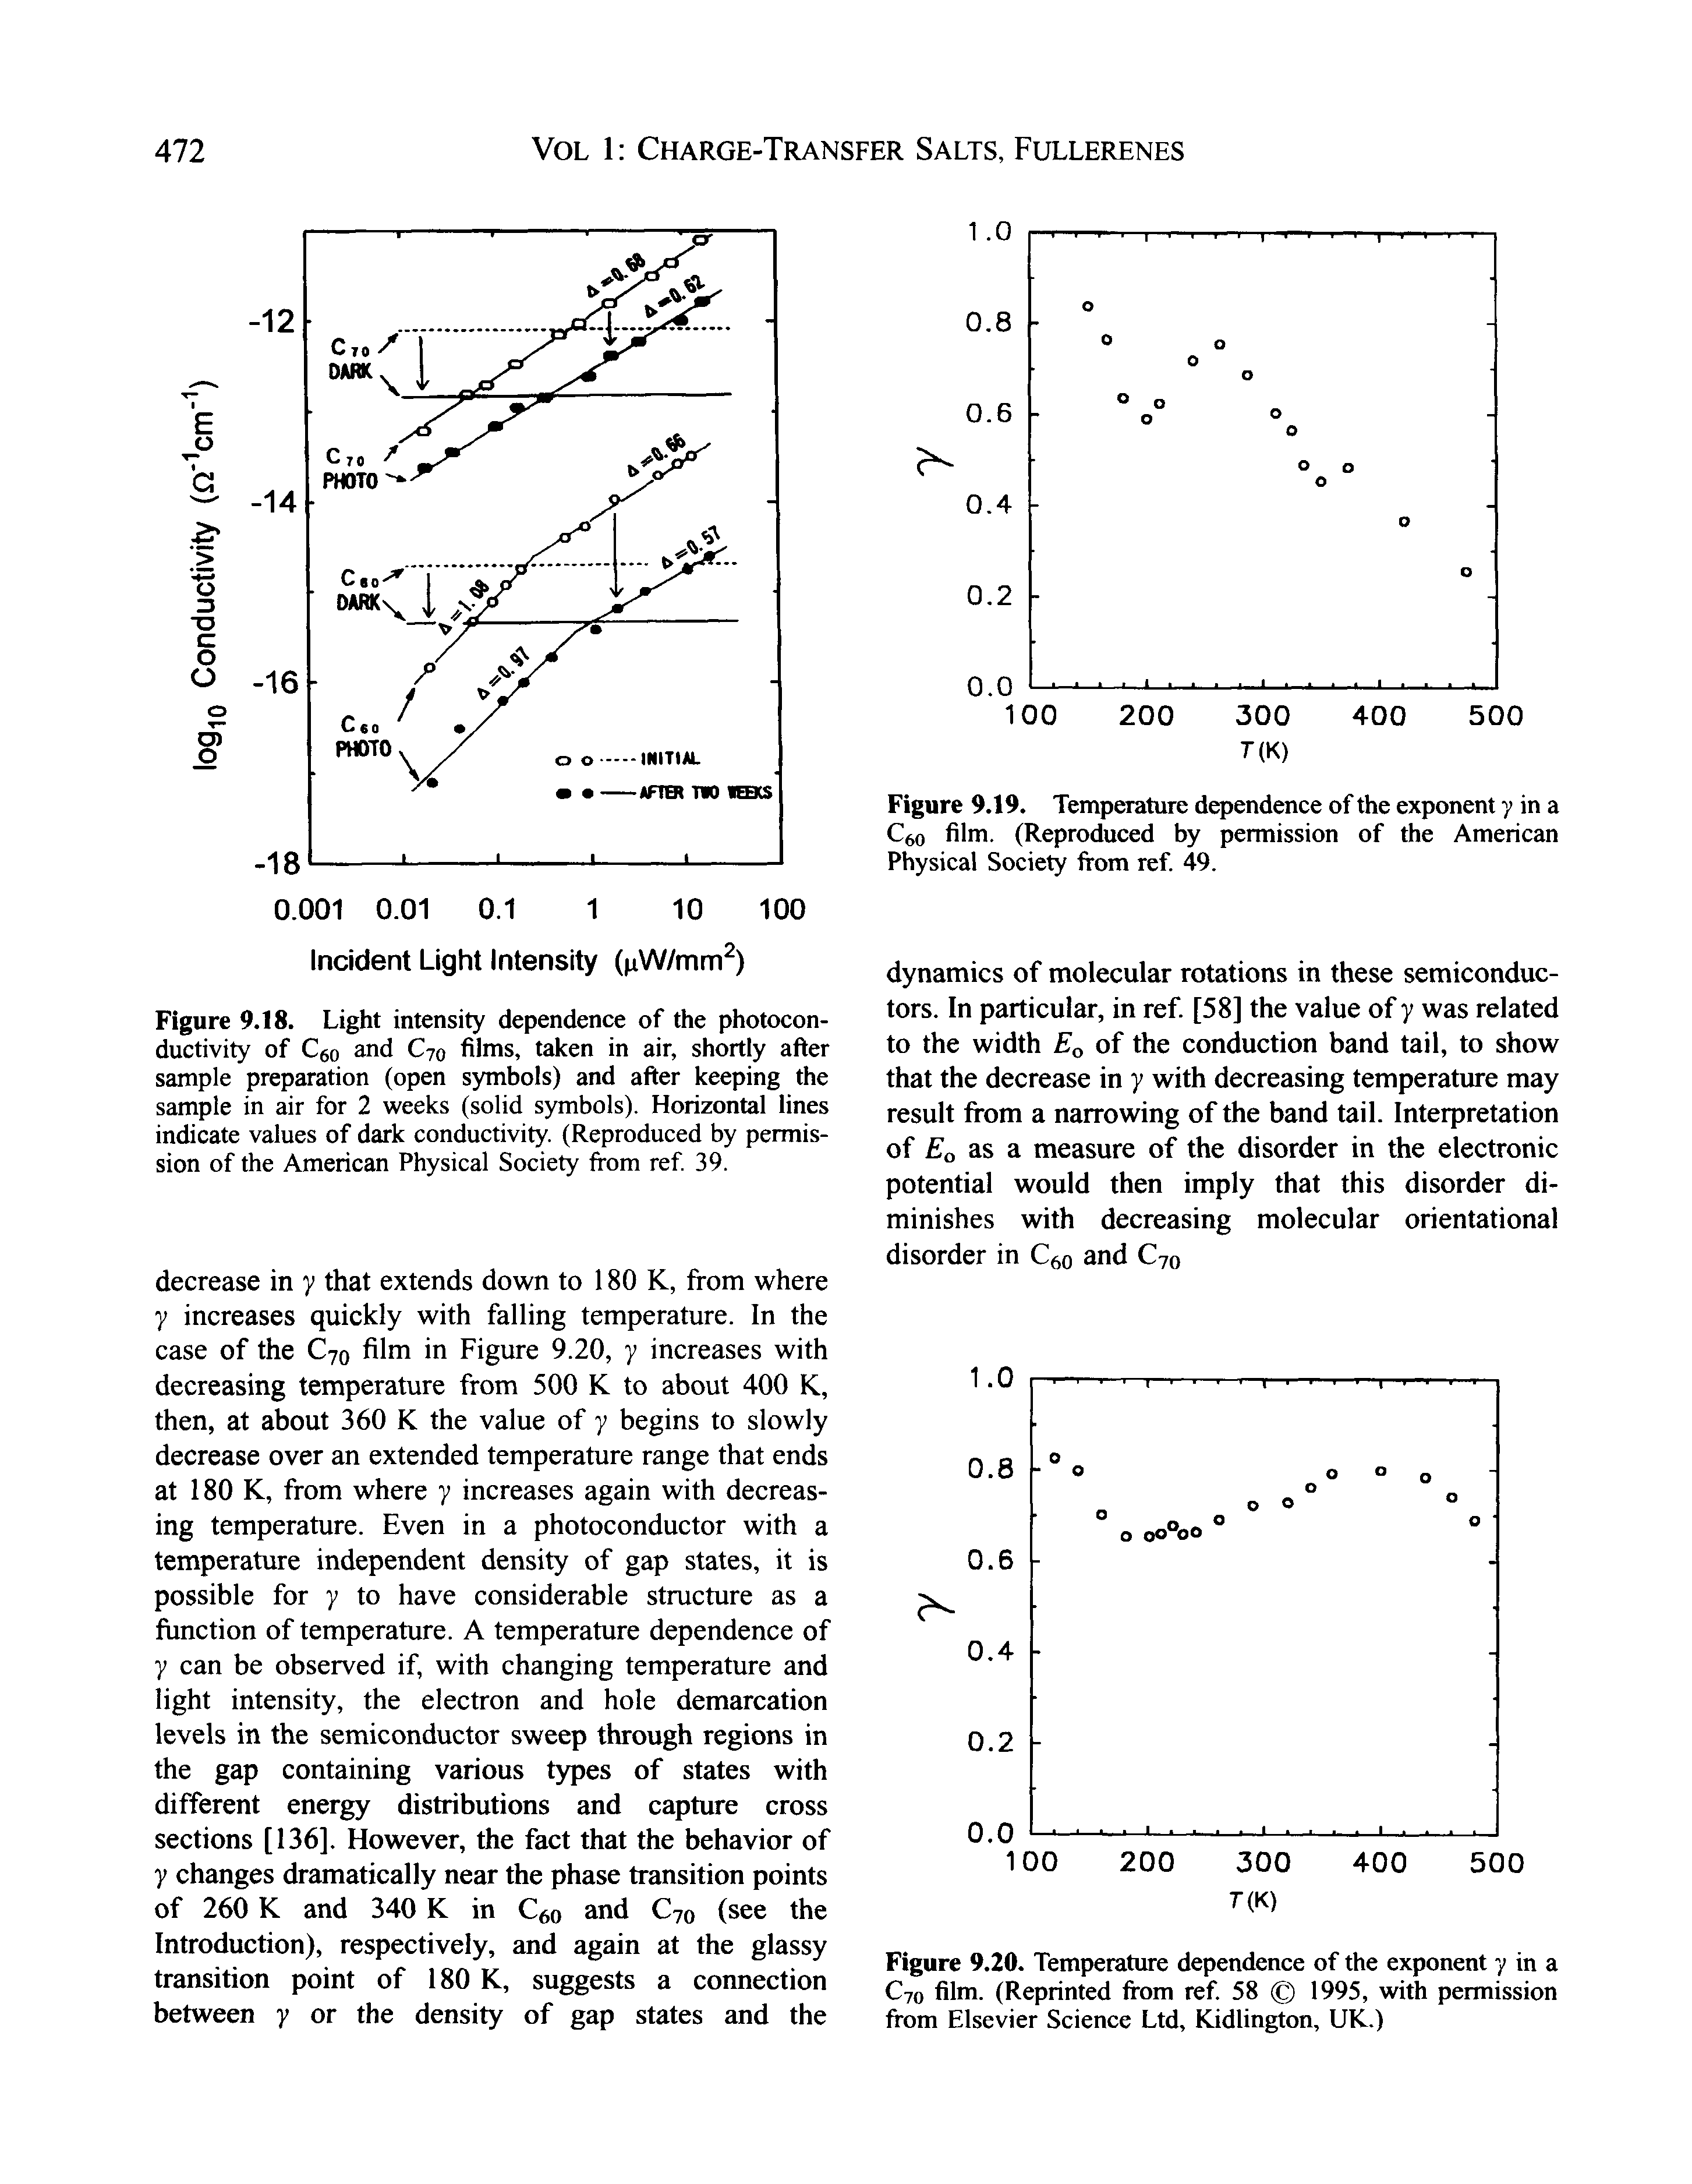 Figure 9.18. Light intensity dependence of the photoconductivity of Cgo and C70 films, taken in air, shortly after sample preparation (open symbols) and after keeping the sample in air for 2 weeks (solid symbols). Horizontal lines indicate values of dark conductivity. (Reproduced by permission of the American Physical Society Irom ref 39.